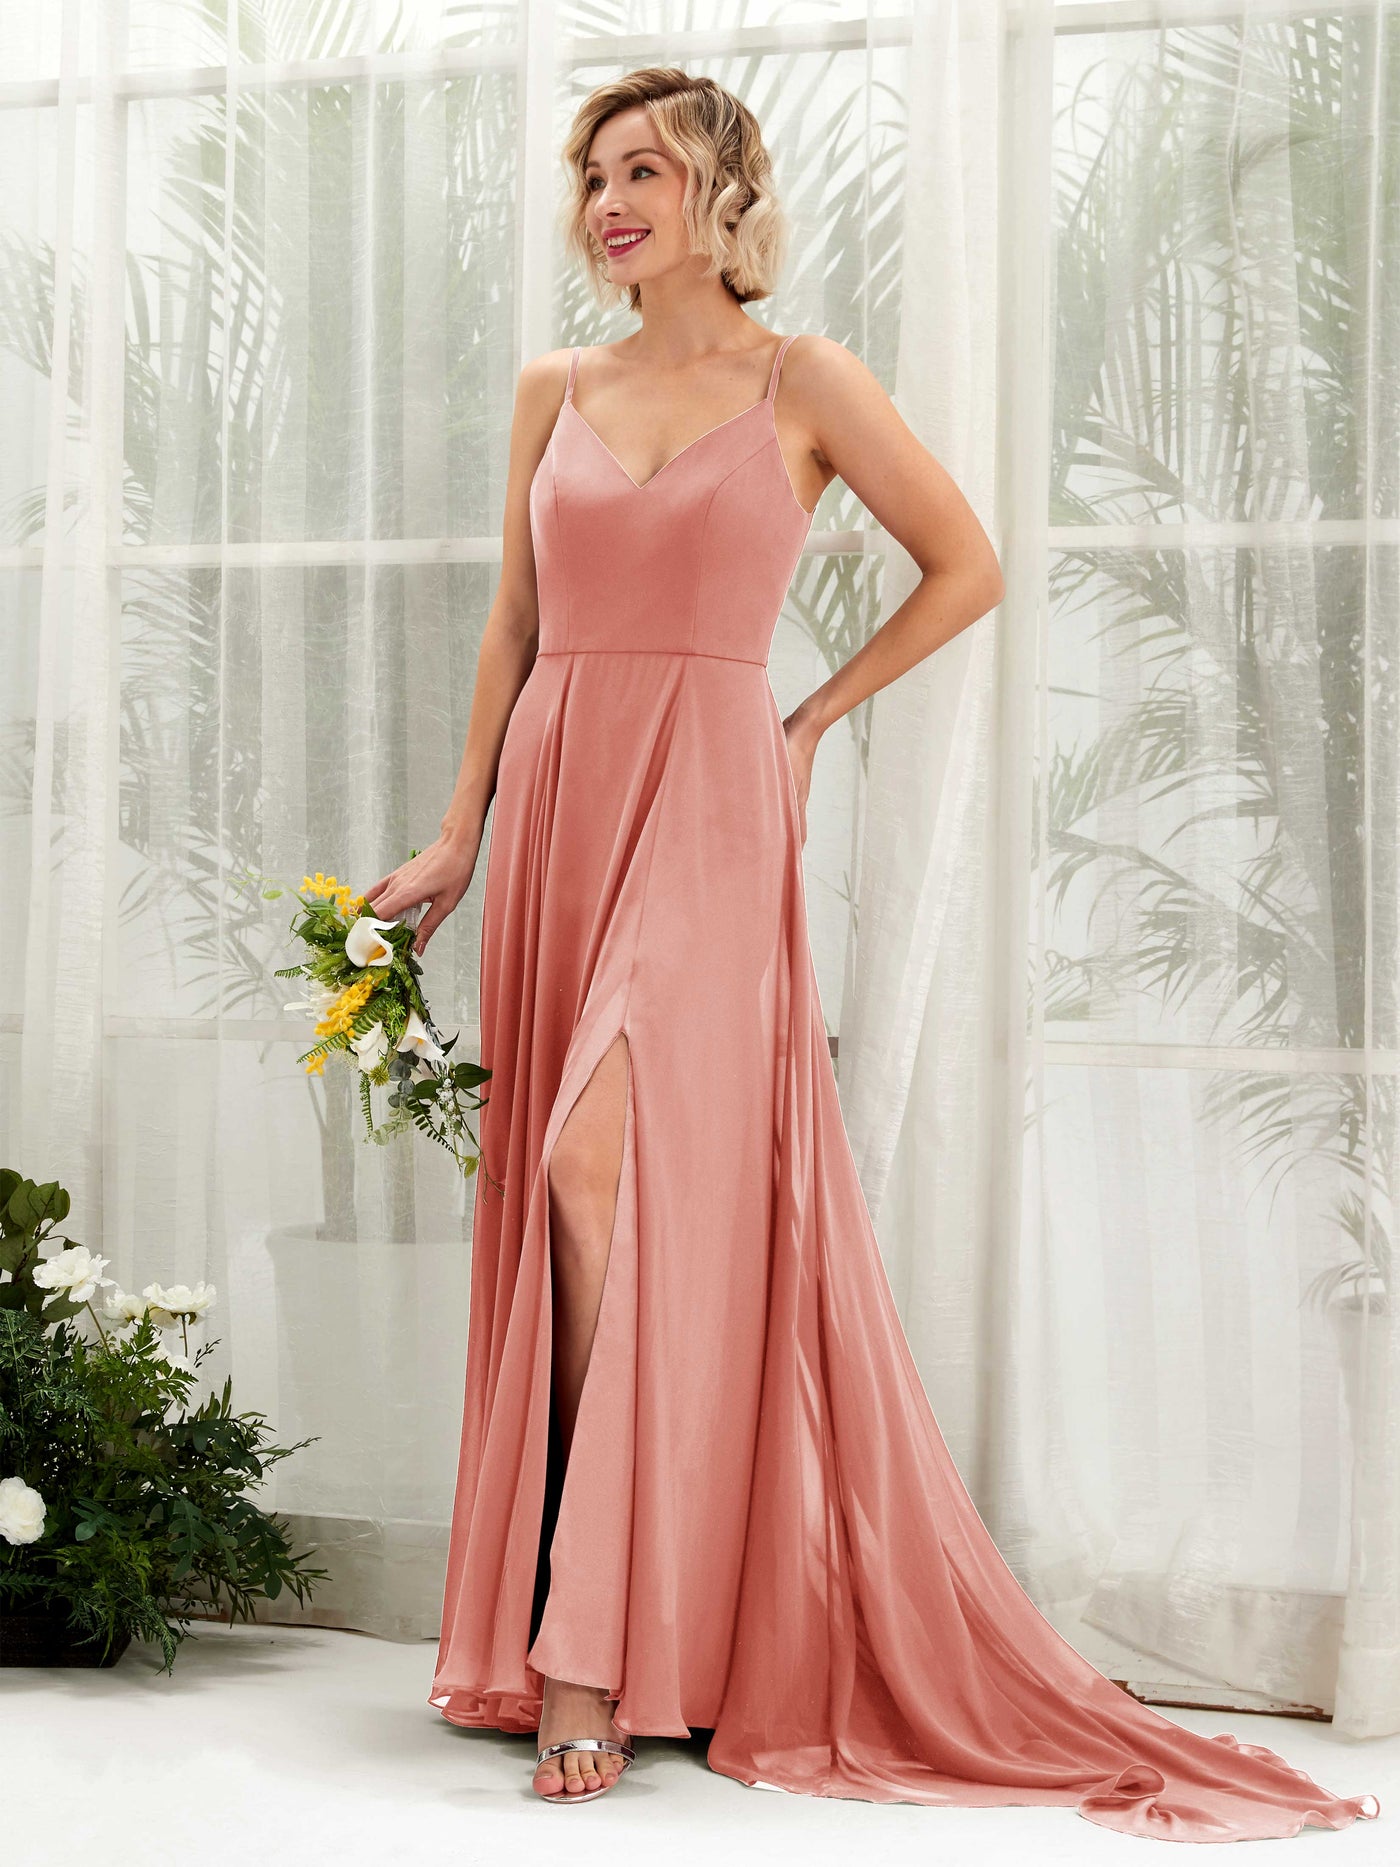 Champagne Rose Bridesmaid Dresses Bridesmaid Dress A-line Chiffon V-neck Full Length Sleeveless Wedding Party Dress (81224106)#color_champagne-rose